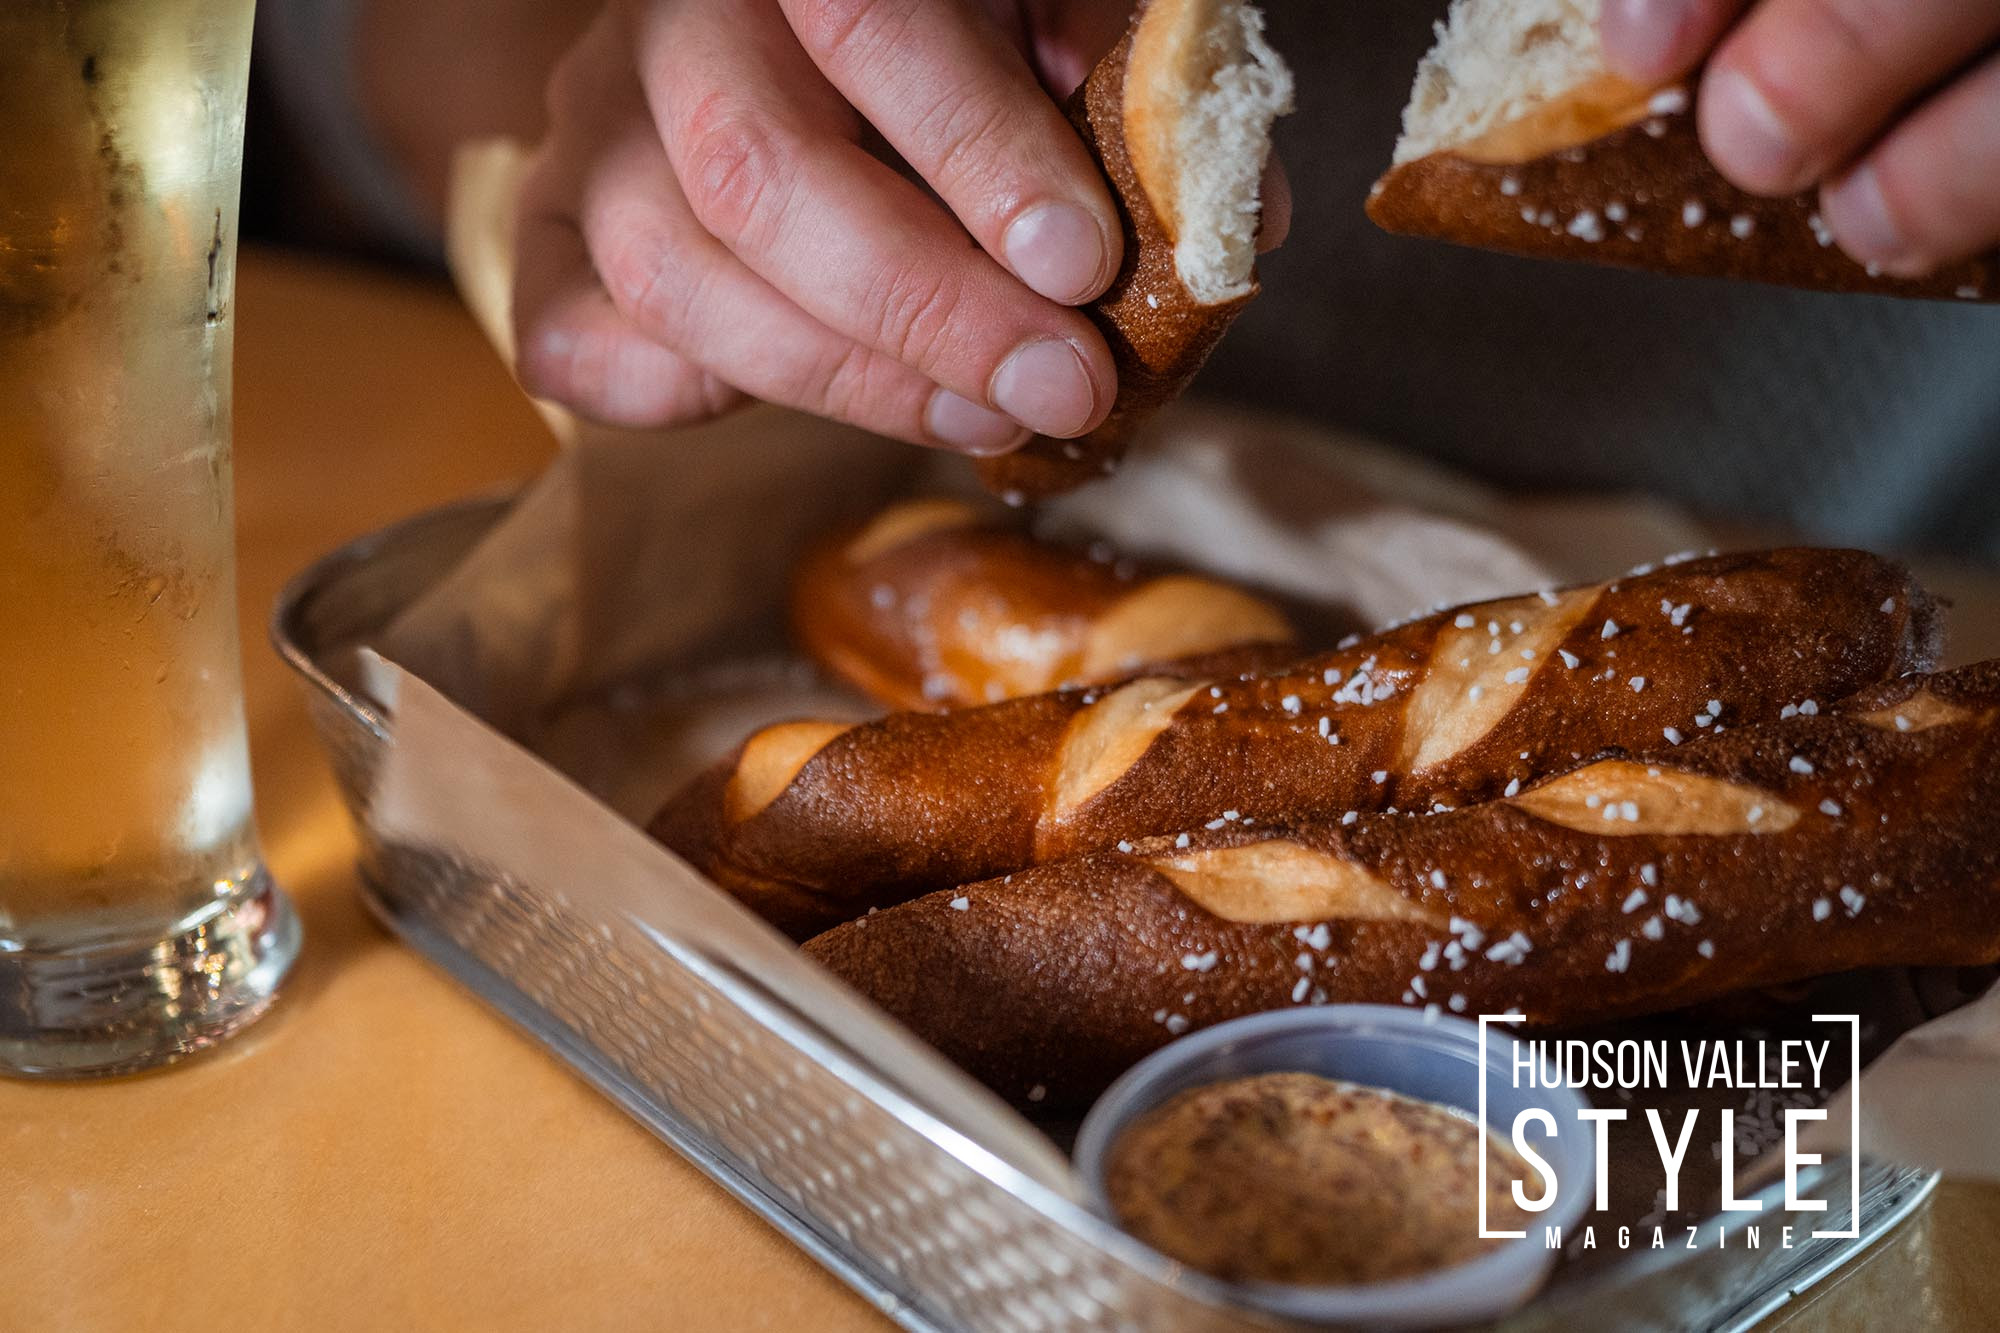 From Pretzels to Stouts: A Taste Tour of Clemson Brothers Brewery in New Paltz, NY – Restaurant Reviews with Photographer Maxwell Alexander